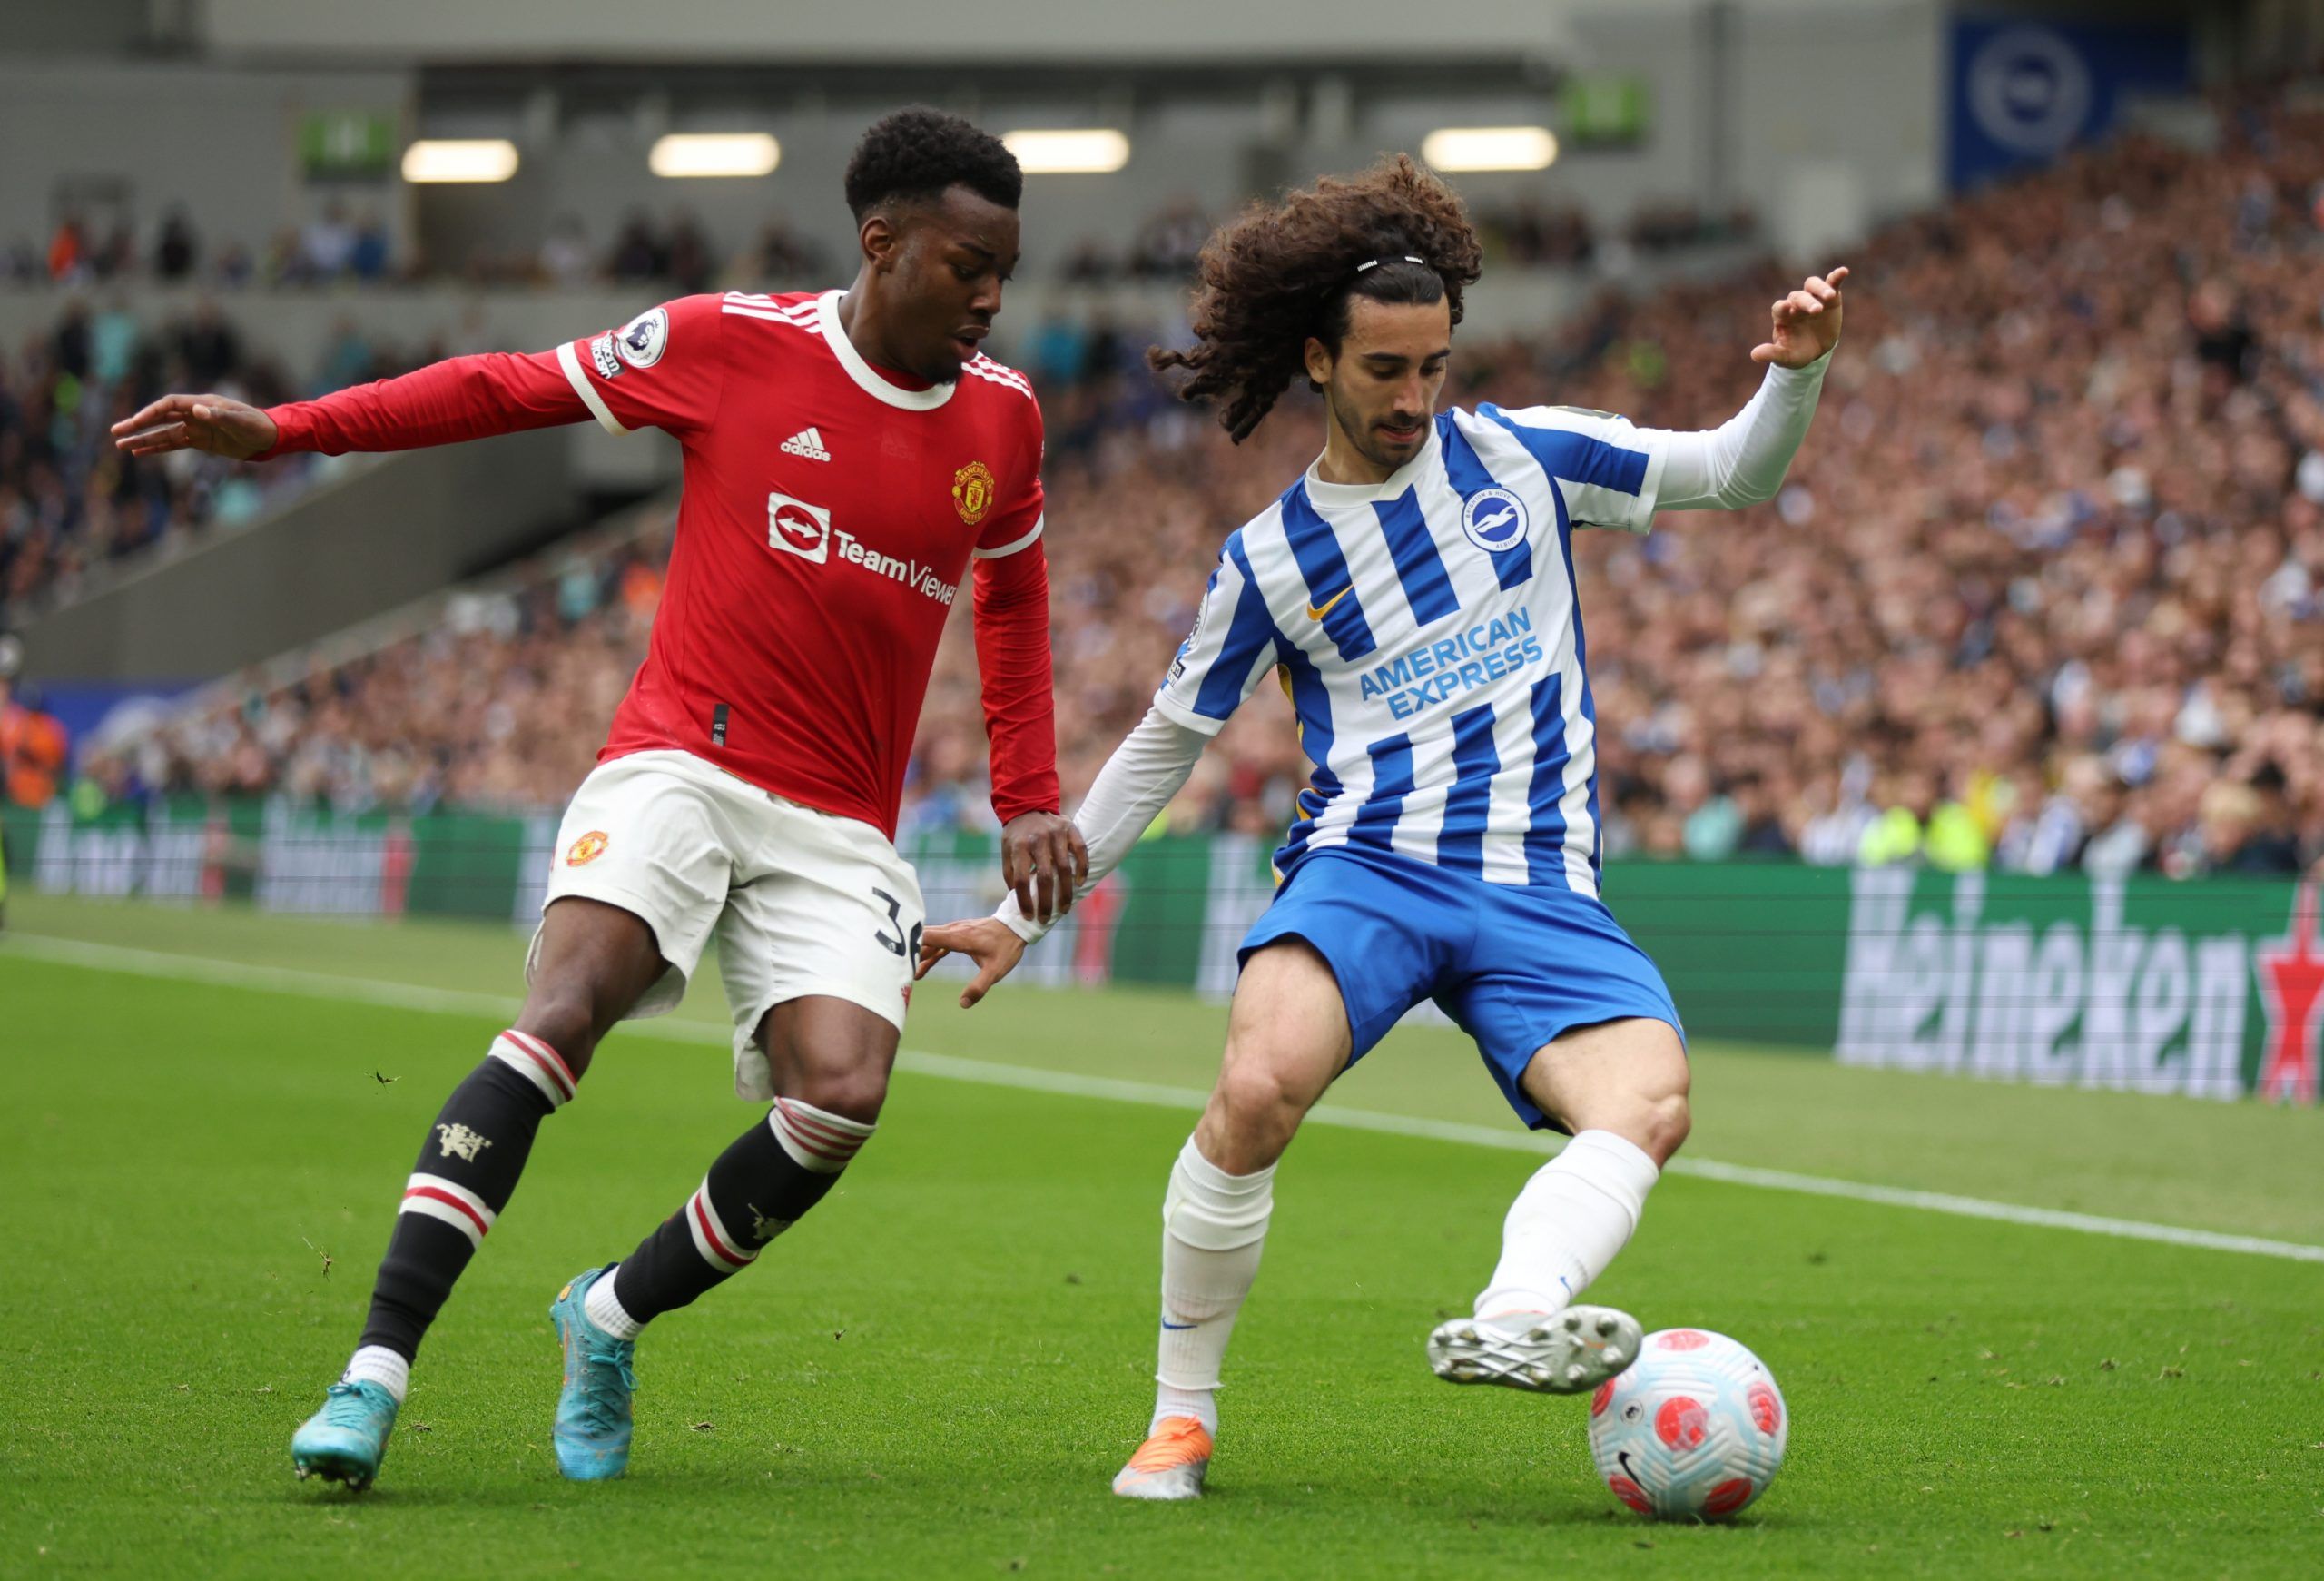 Soccer Football - Premier League - Brighton &amp; Hove Albion v Manchester United - The American Express Community Stadium, Brighton, Britain - May 7, 2022 Manchester United's Anthony Elanga in action with Brighton &amp; Hove Albion's Marc Cucurella REUTERS/Ian Walton EDITORIAL USE ONLY. No use with unauthorized audio, video, data, fixture lists, club/league logos or 'live' services. Online in-match use limited to 75 images, no video emulation. No use in betting, games or single club /league/pla